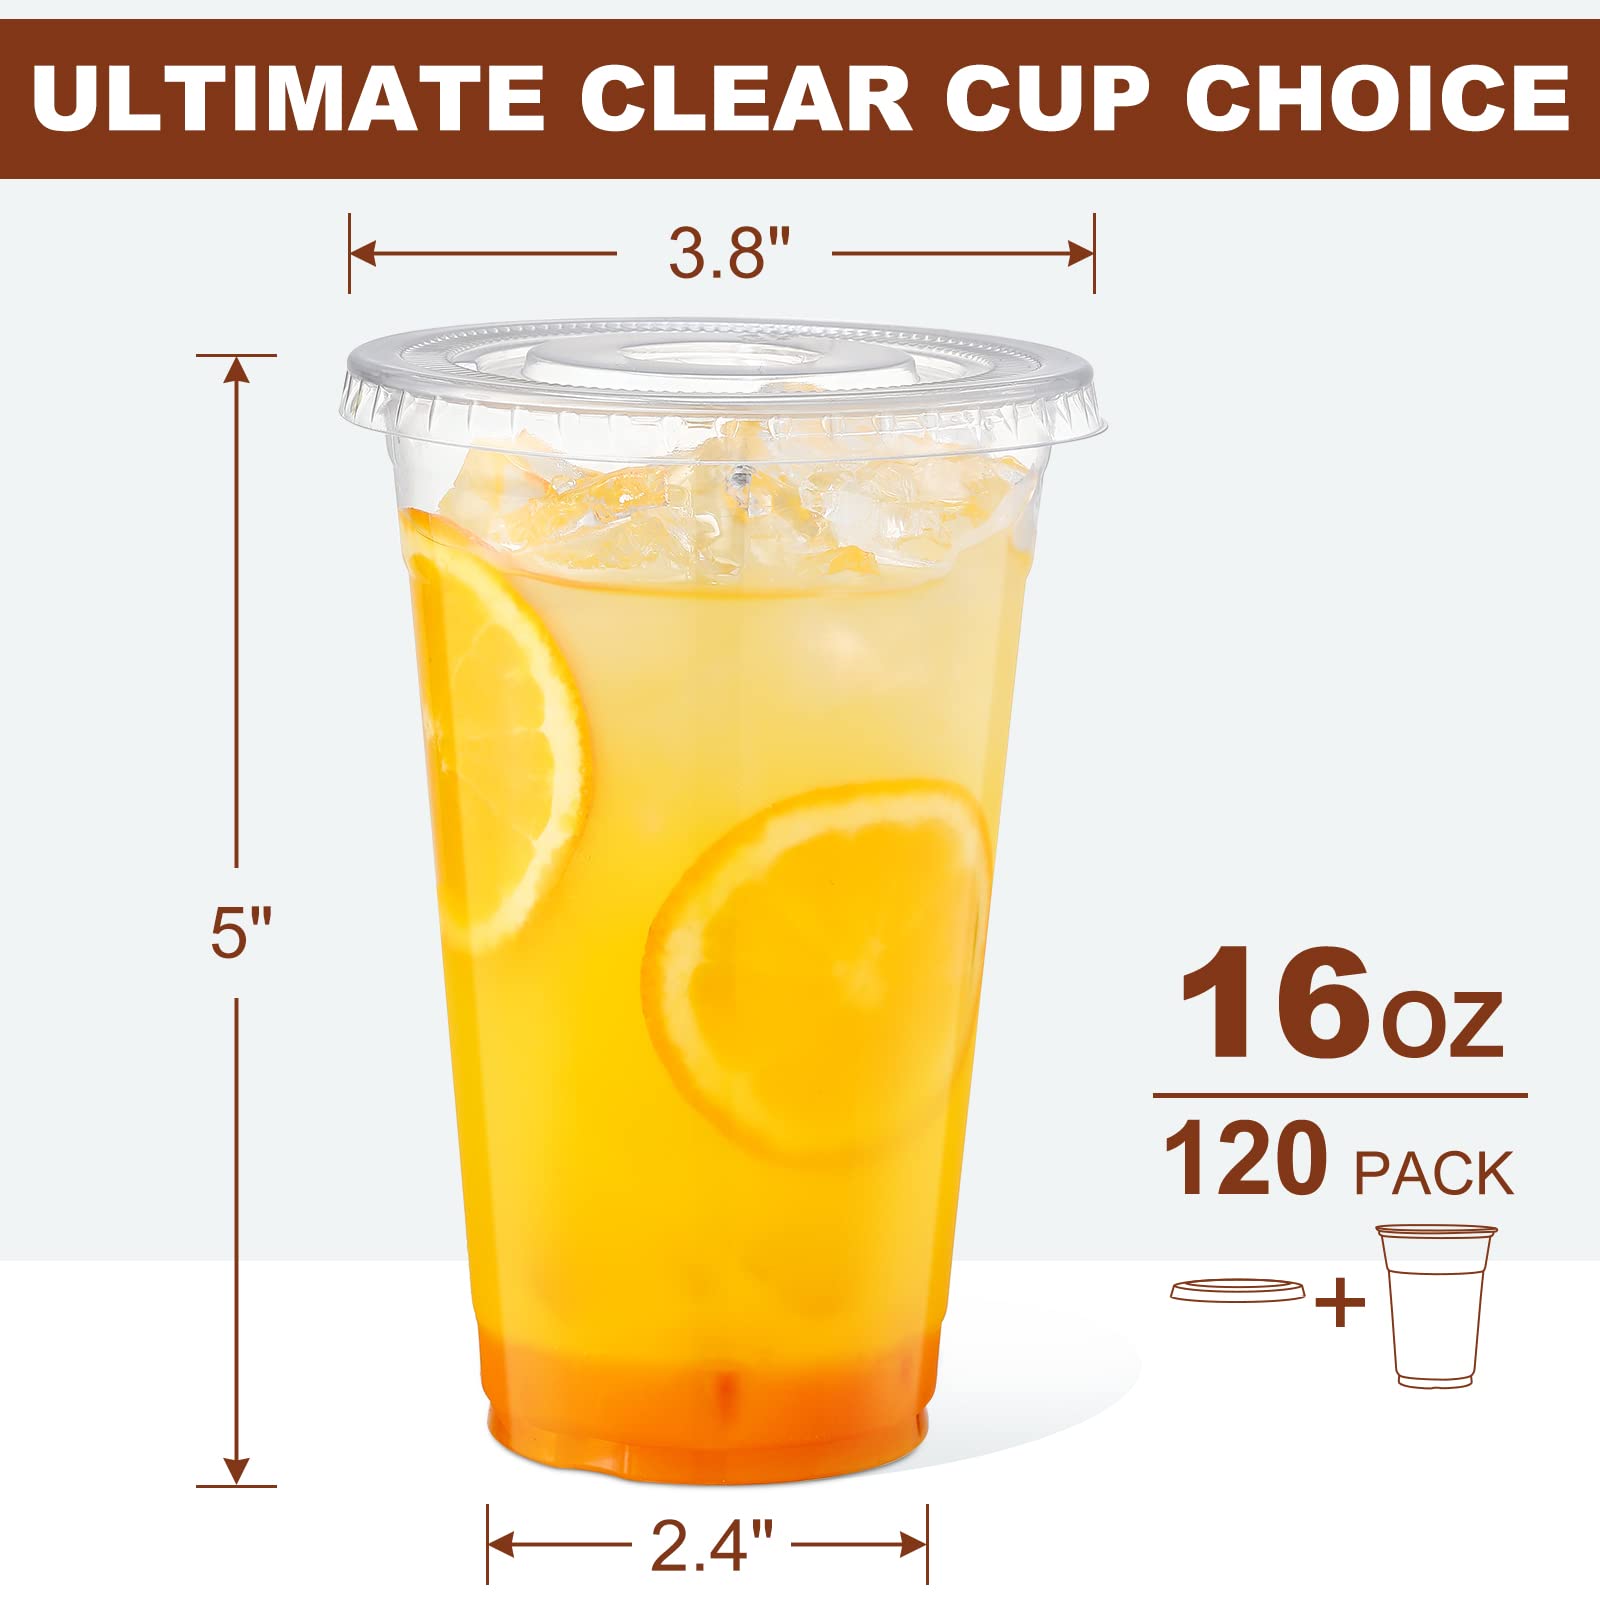 AOZITA 120 Sets - 16 oz Clear Plastic Cups with Lids, Disposable Cups With Straw Slot Lids for Cold Drinks, Milkshake, Smoothie, Iced Coffee and TO-GO Drinkings